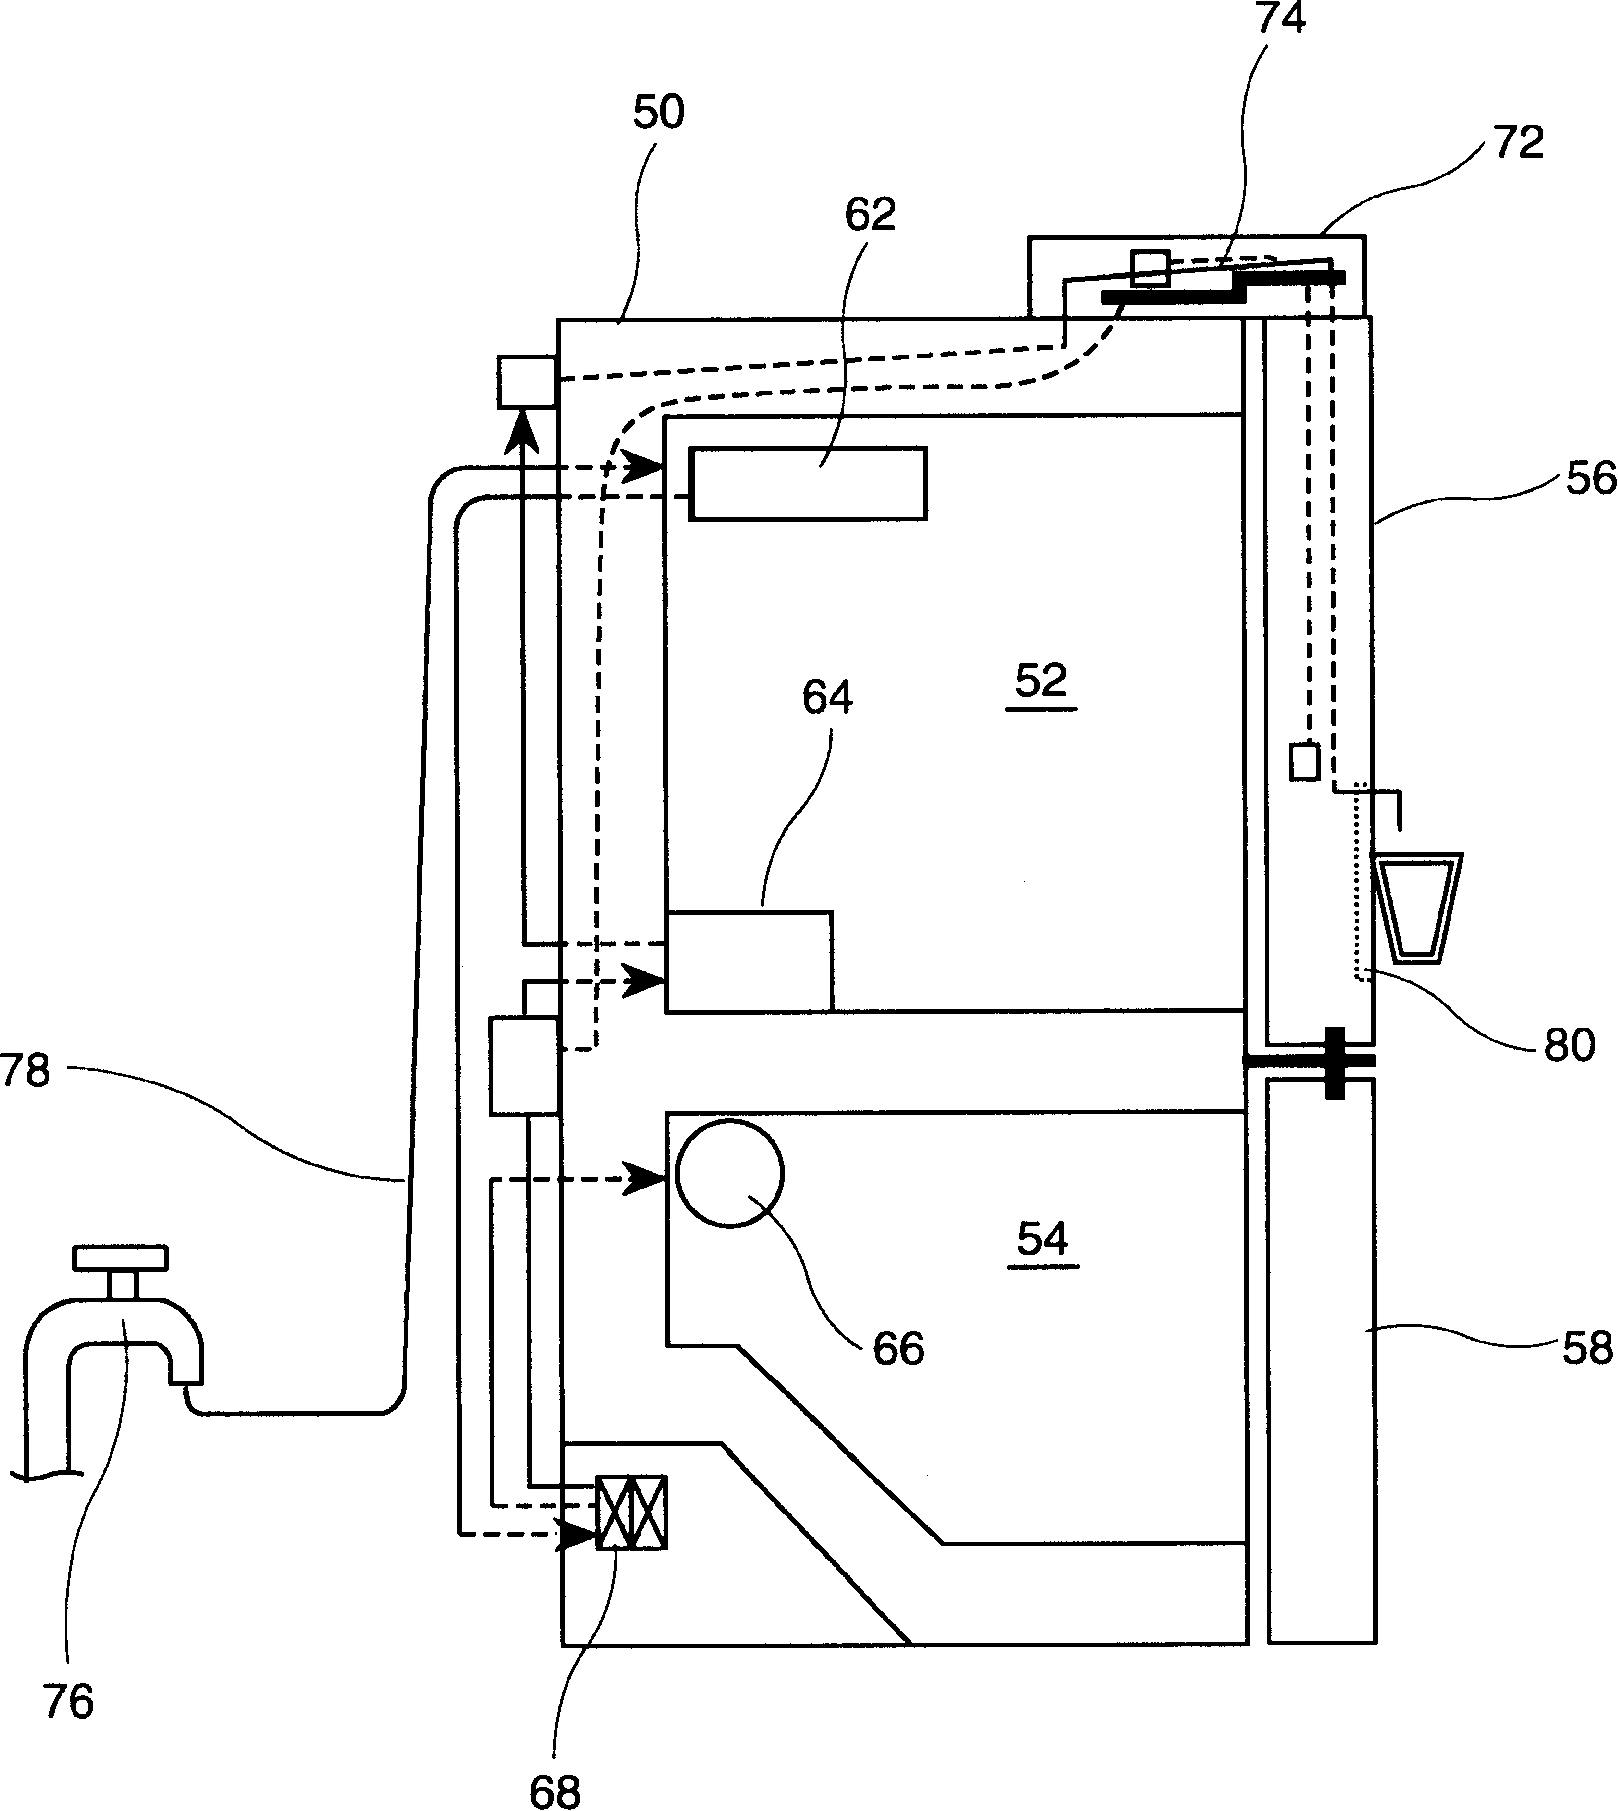 Action switch structure of refrigerator distributor